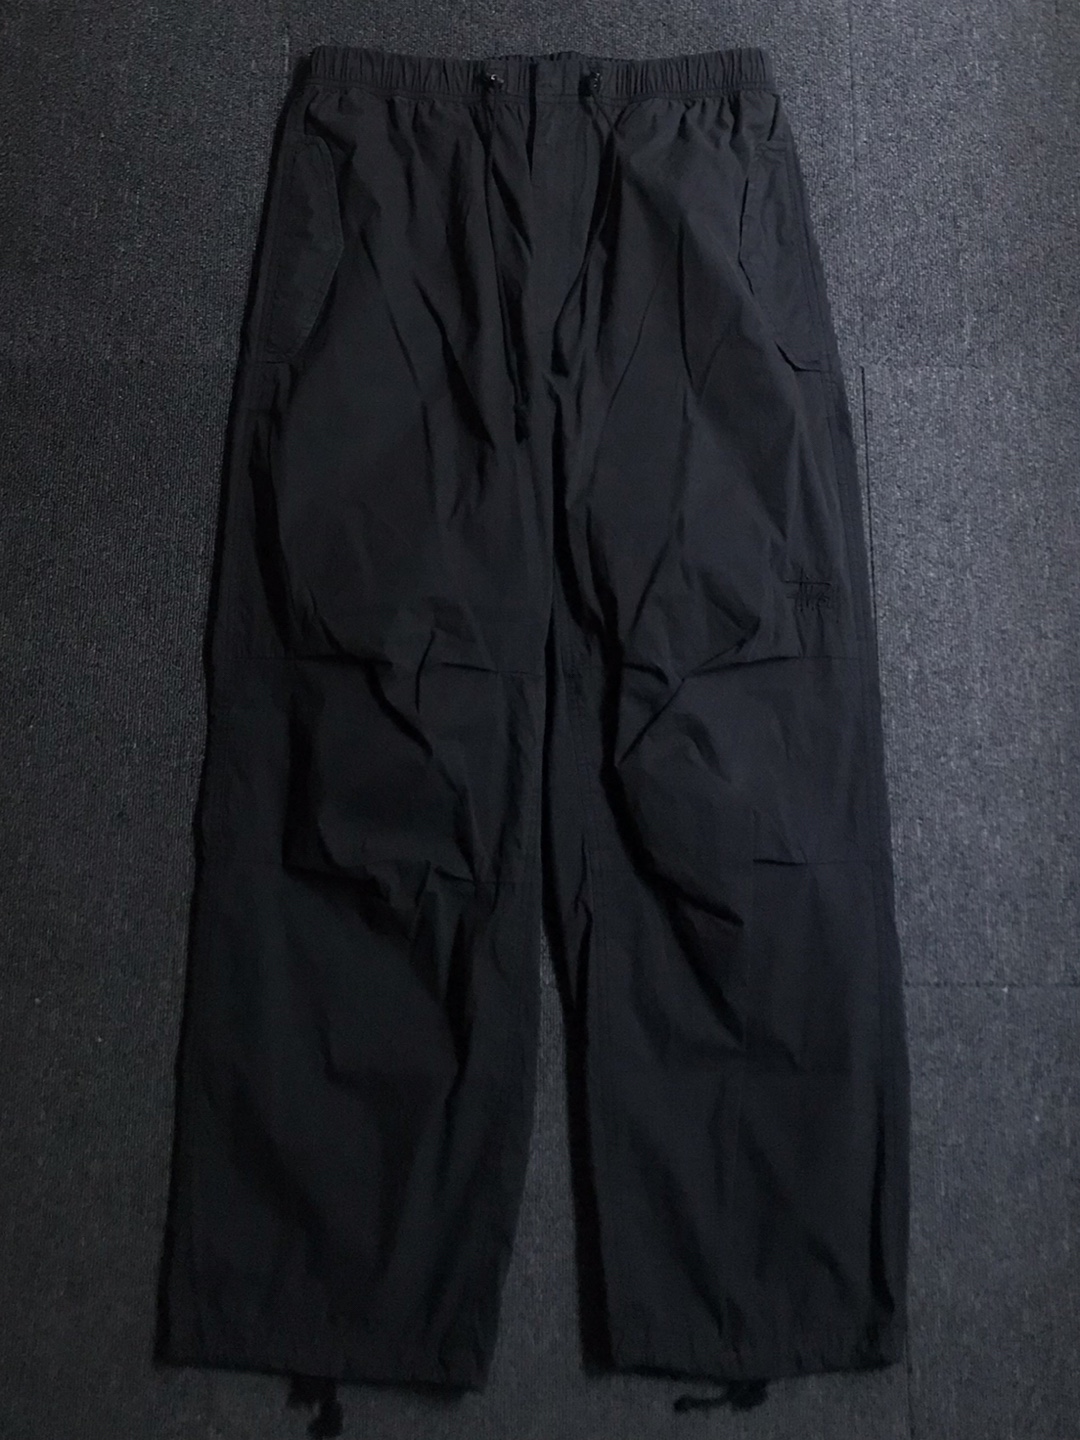 stussy lightweight cotton/nylon banded military pants (M size,